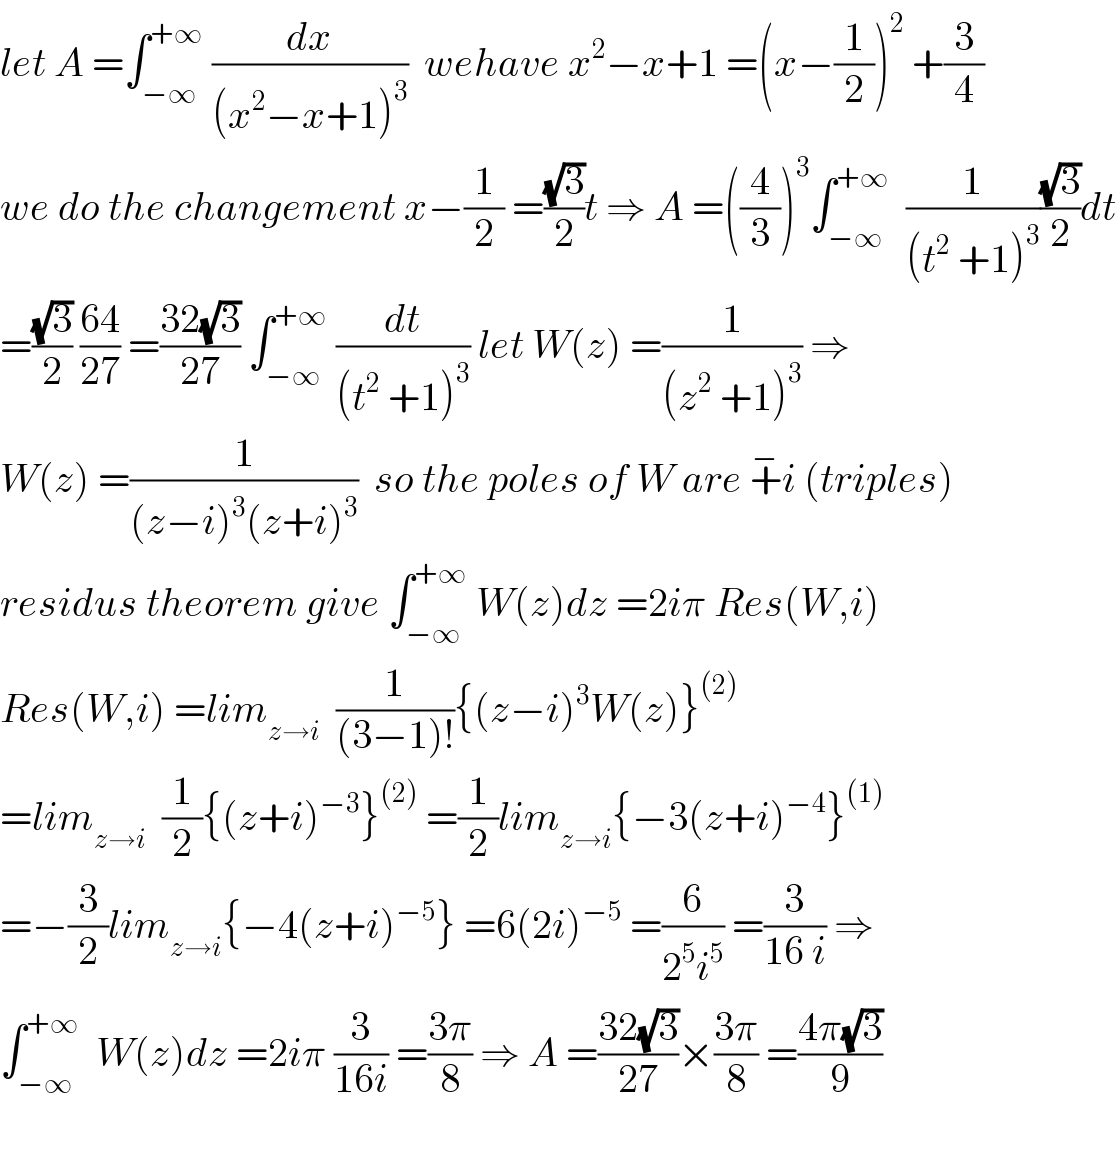 let A =∫_(−∞) ^(+∞)  (dx/((x^2 −x+1)^3 ))  wehave x^2 −x+1 =(x−(1/2))^2  +(3/4)  we do the changement x−(1/2) =((√3)/2)t ⇒ A =((4/3))^3 ∫_(−∞) ^(+∞)   (1/((t^2  +1)^3 ))((√3)/2)dt  =((√3)/2) ((64)/(27)) =((32(√3))/(27)) ∫_(−∞) ^(+∞)  (dt/((t^2  +1)^3 )) let W(z) =(1/((z^2  +1)^3 )) ⇒  W(z) =(1/((z−i)^3 (z+i)^3 ))  so the poles of W are +^− i (triples)  residus theorem give ∫_(−∞) ^(+∞)  W(z)dz =2iπ Res(W,i)  Res(W,i) =lim_(z→i)   (1/((3−1)!)){(z−i)^3 W(z)}^((2))   =lim_(z→i)   (1/2){(z+i)^(−3) }^((2))  =(1/2)lim_(z→i) {−3(z+i)^(−4) }^((1))   =−(3/2)lim_(z→i) {−4(z+i)^(−5) } =6(2i)^(−5)  =(6/(2^5 i^5 )) =(3/(16 i)) ⇒  ∫_(−∞) ^(+∞)   W(z)dz =2iπ (3/(16i)) =((3π)/8) ⇒ A =((32(√3))/(27))×((3π)/8) =((4π(√3))/9)    